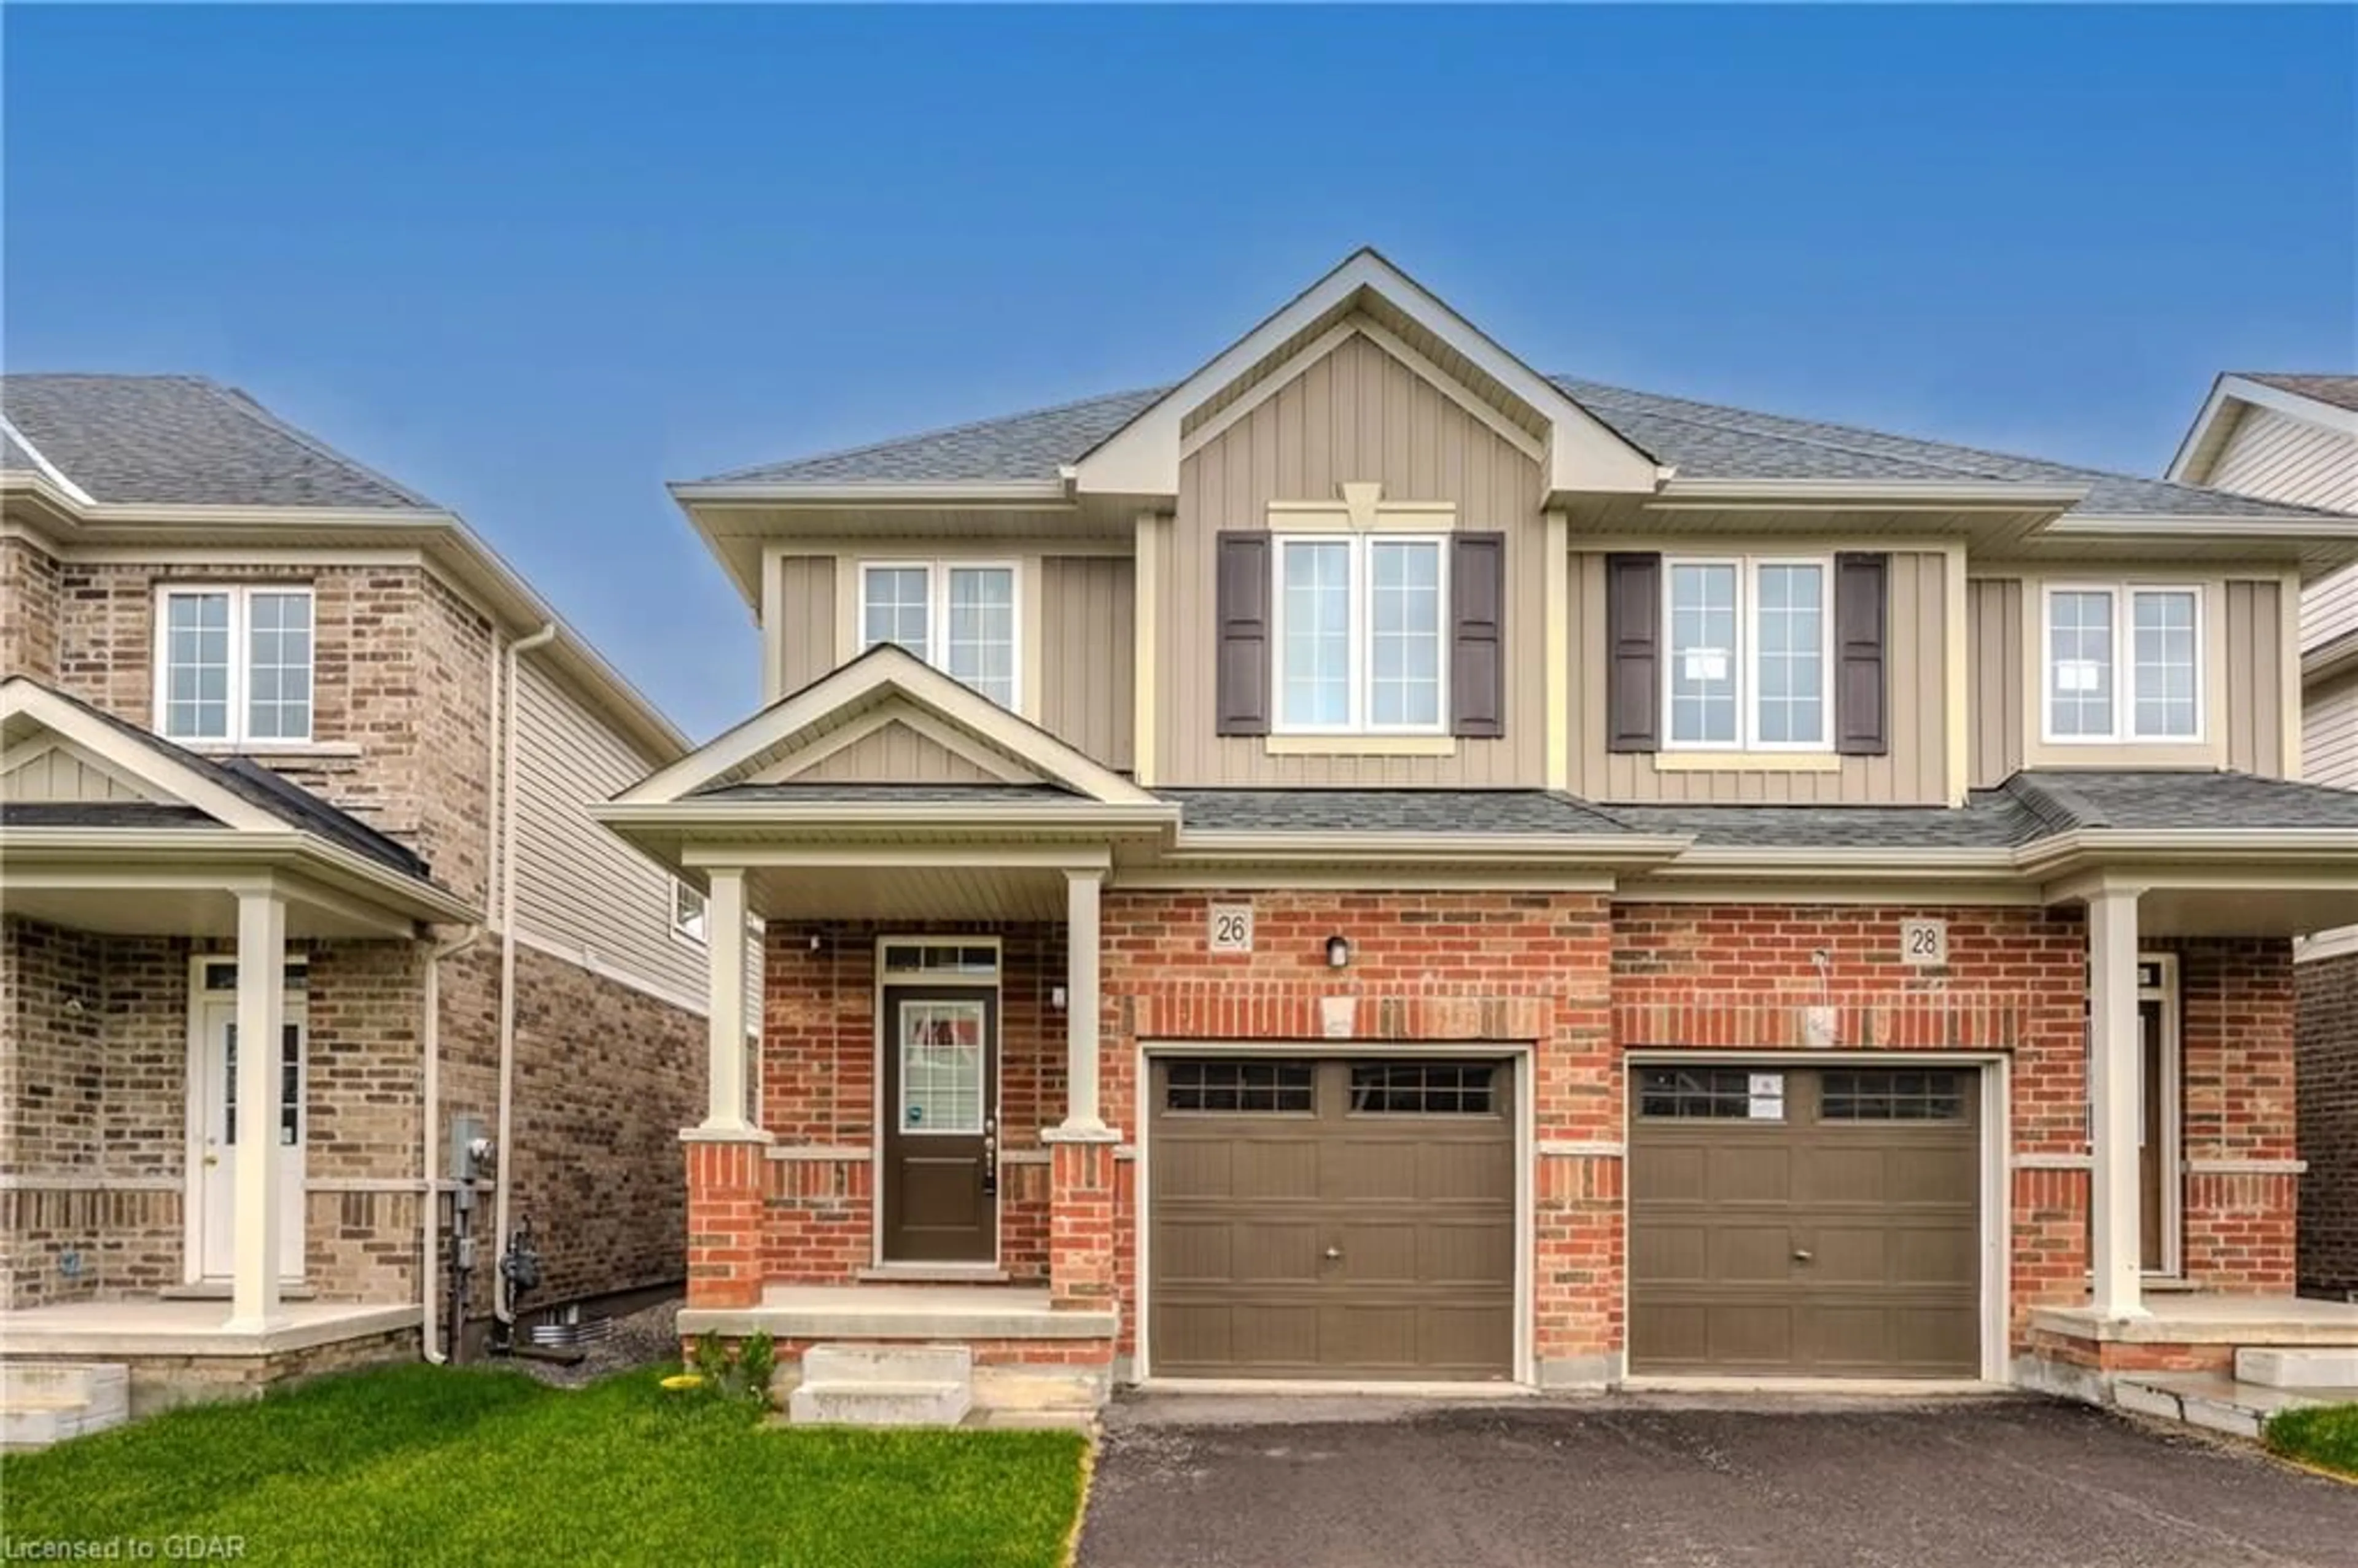 Home with brick exterior material for 26 Elsegood Drive, Guelph Ontario N1L 1B3